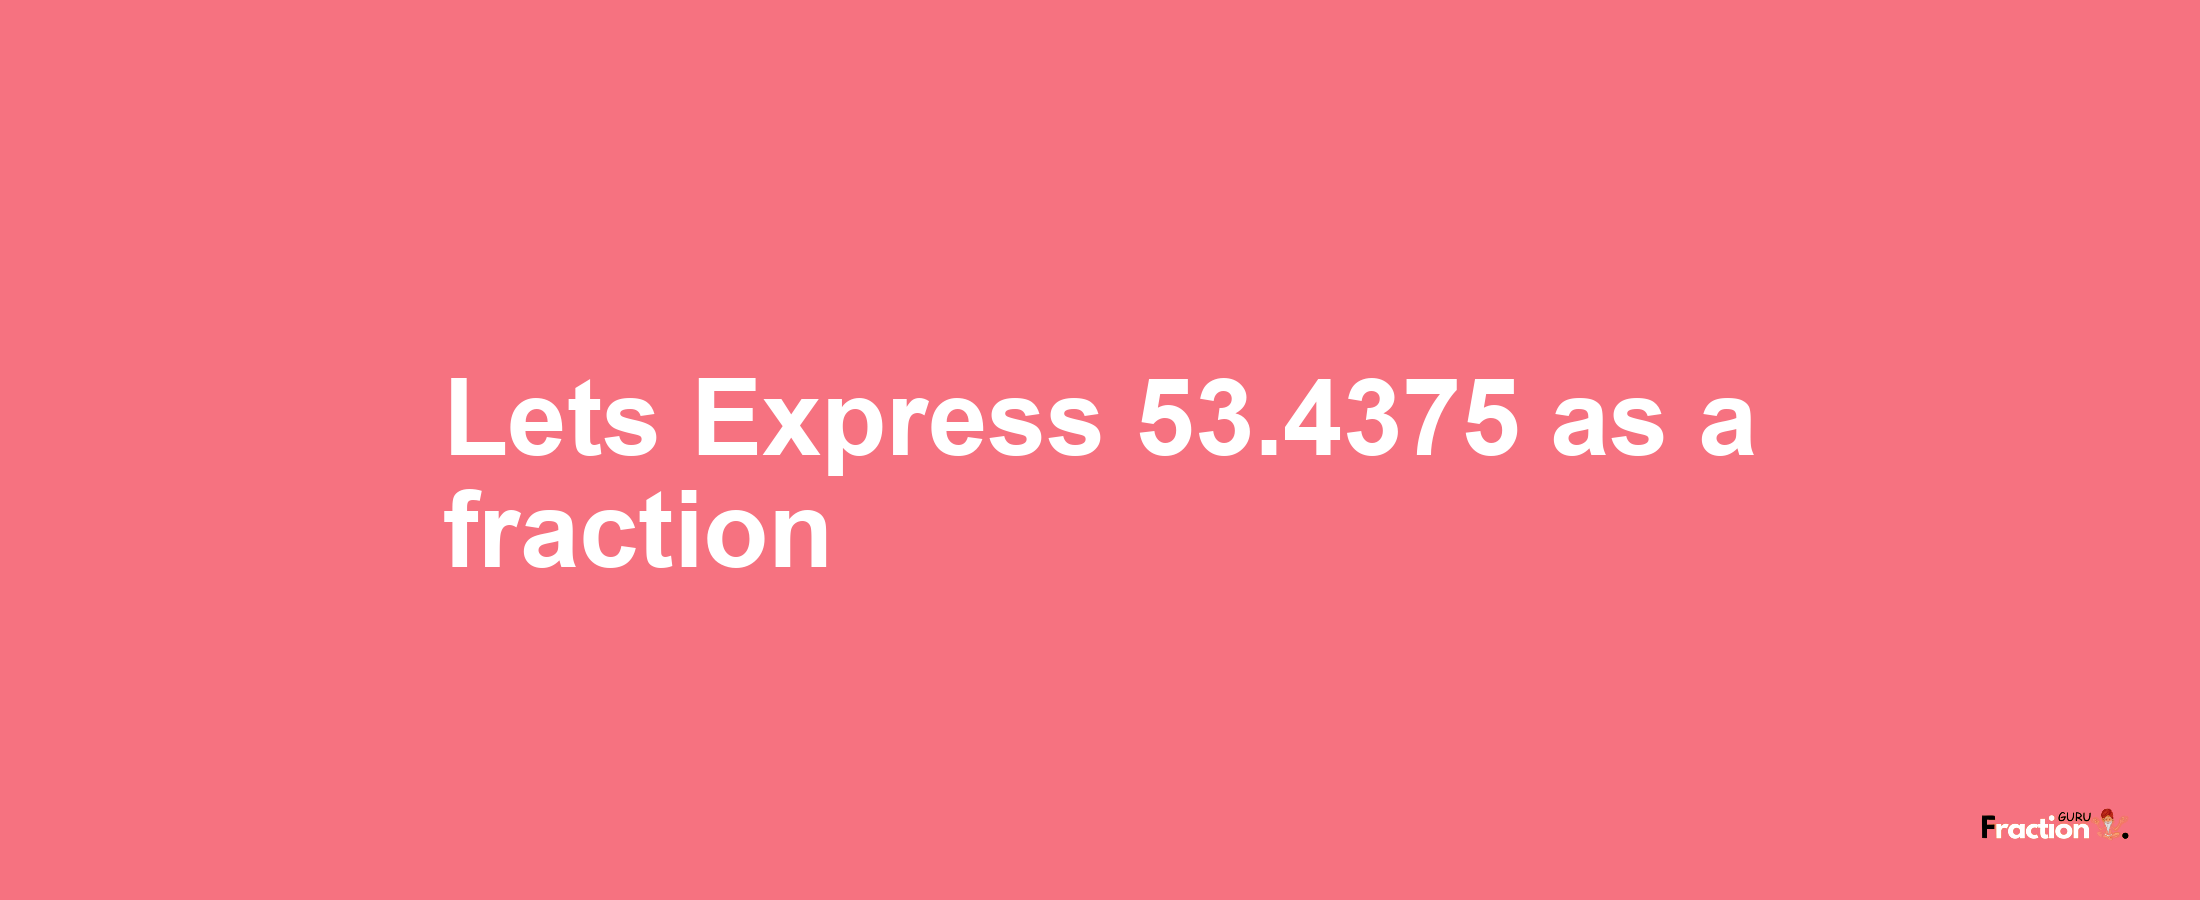 Lets Express 53.4375 as afraction